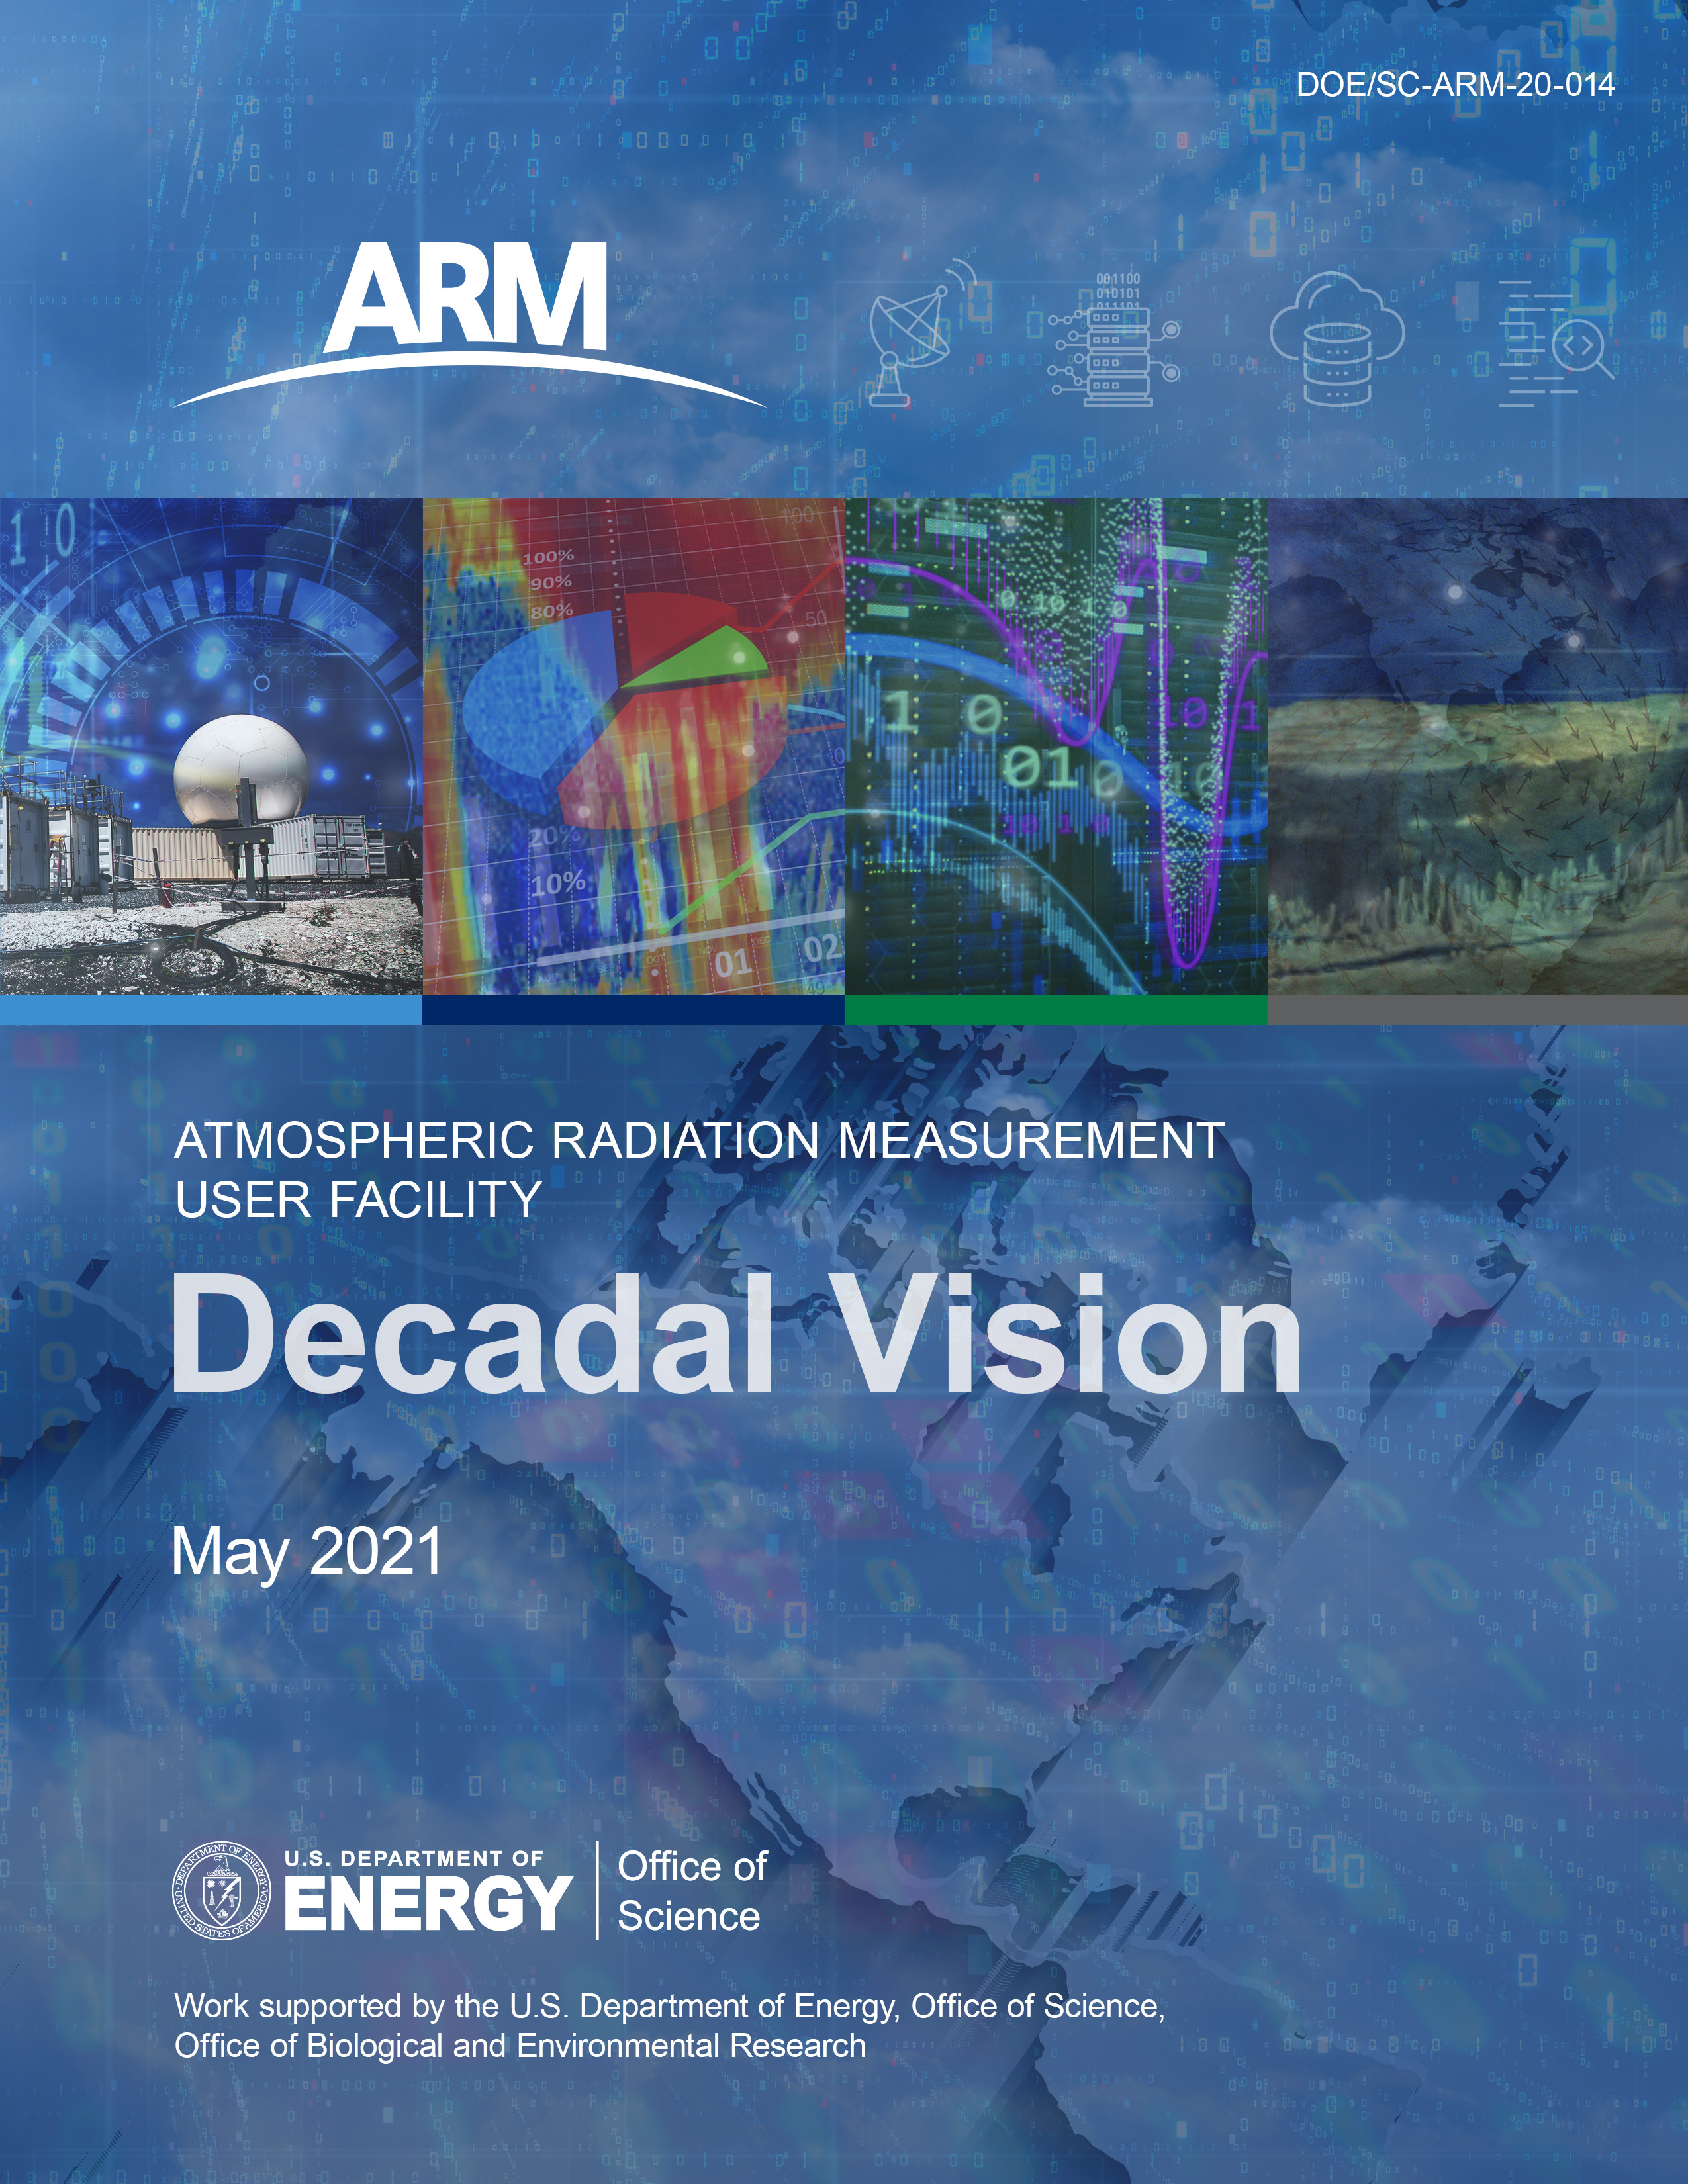 Front cover of the ARM Decadal Vision document published in May 2021